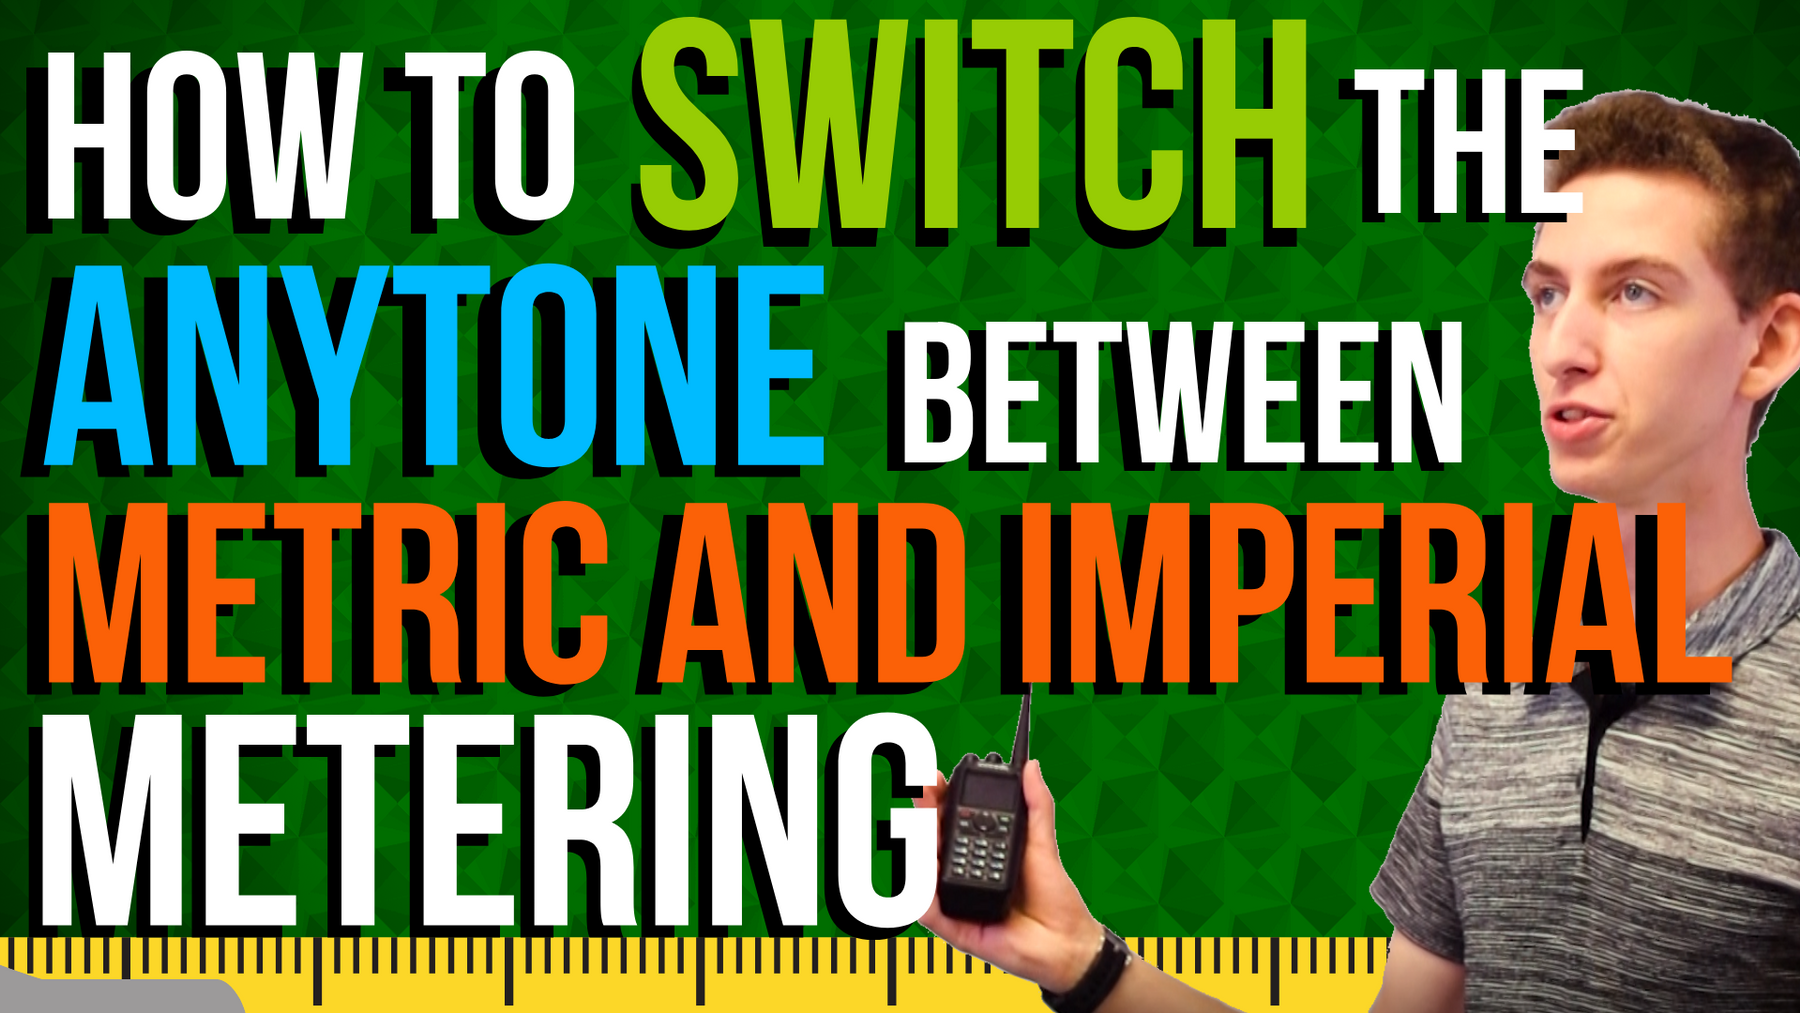 How to switch the AnyTone between metric and imperial metering